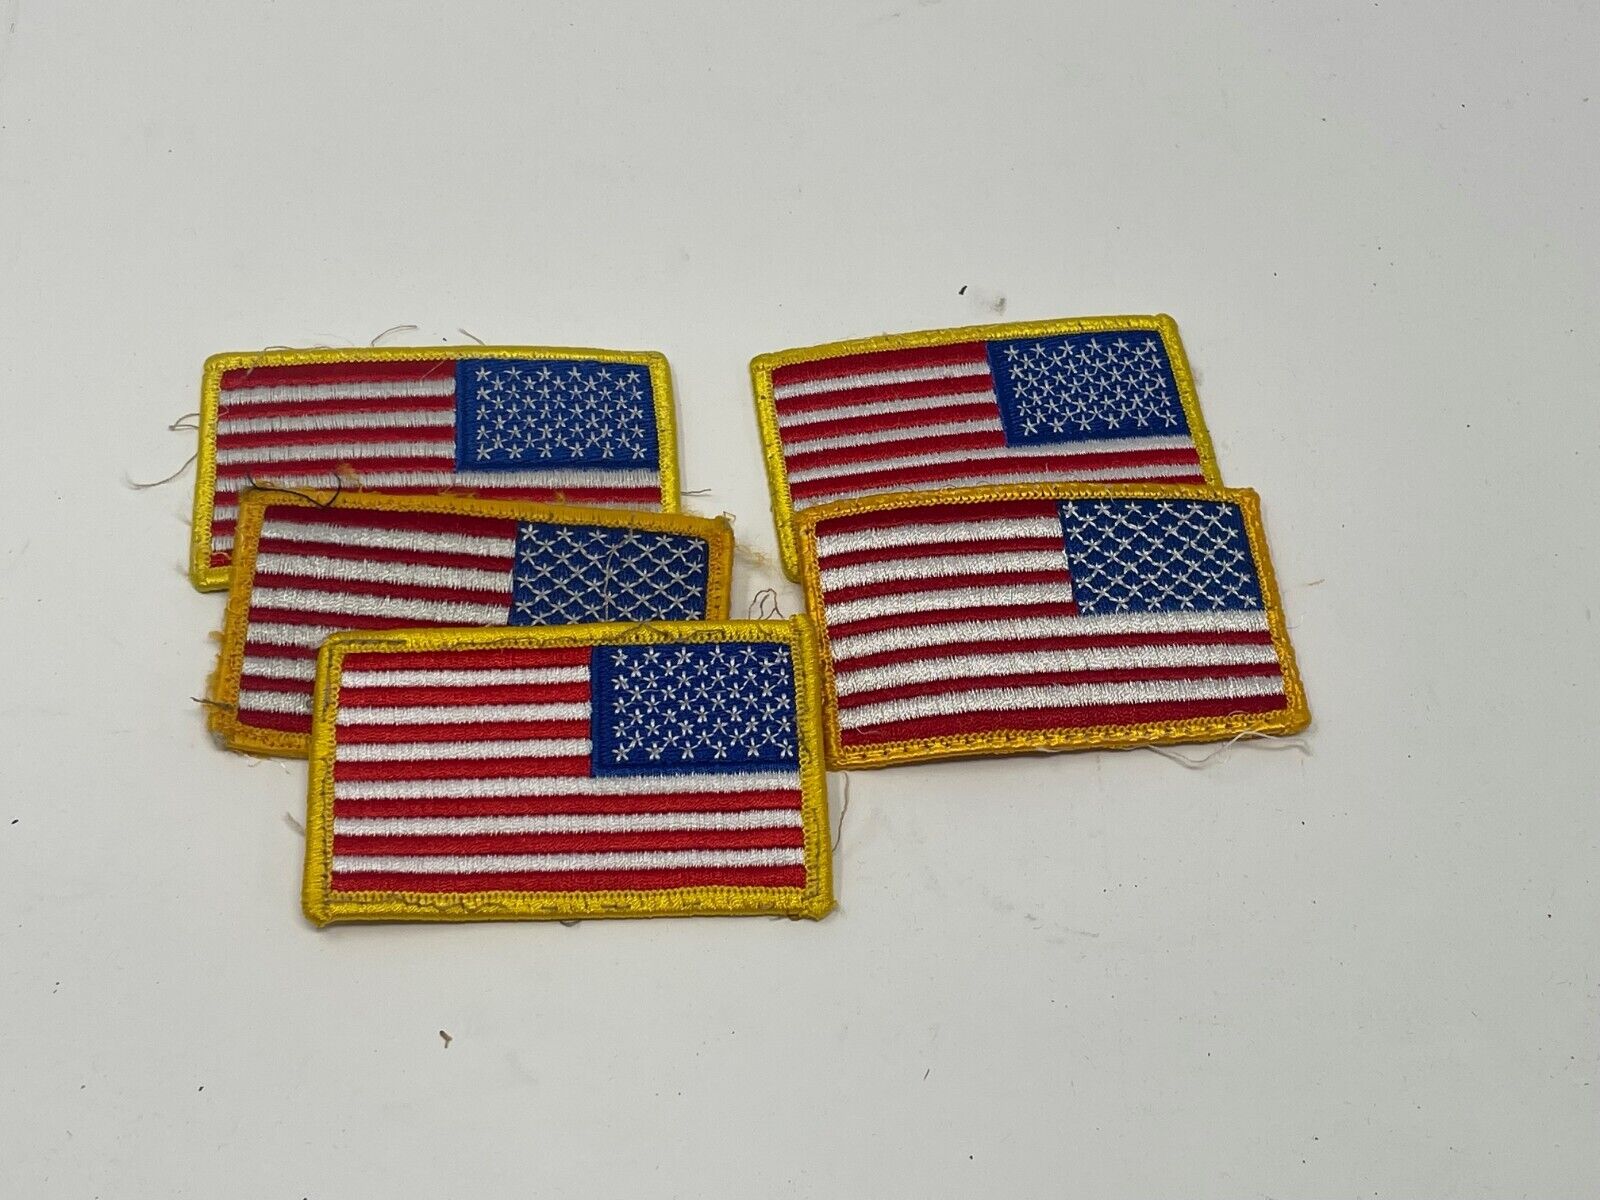 5 Reverse American Flag Patches Removed From US Army Uniforms Early GWOT BDU DCU